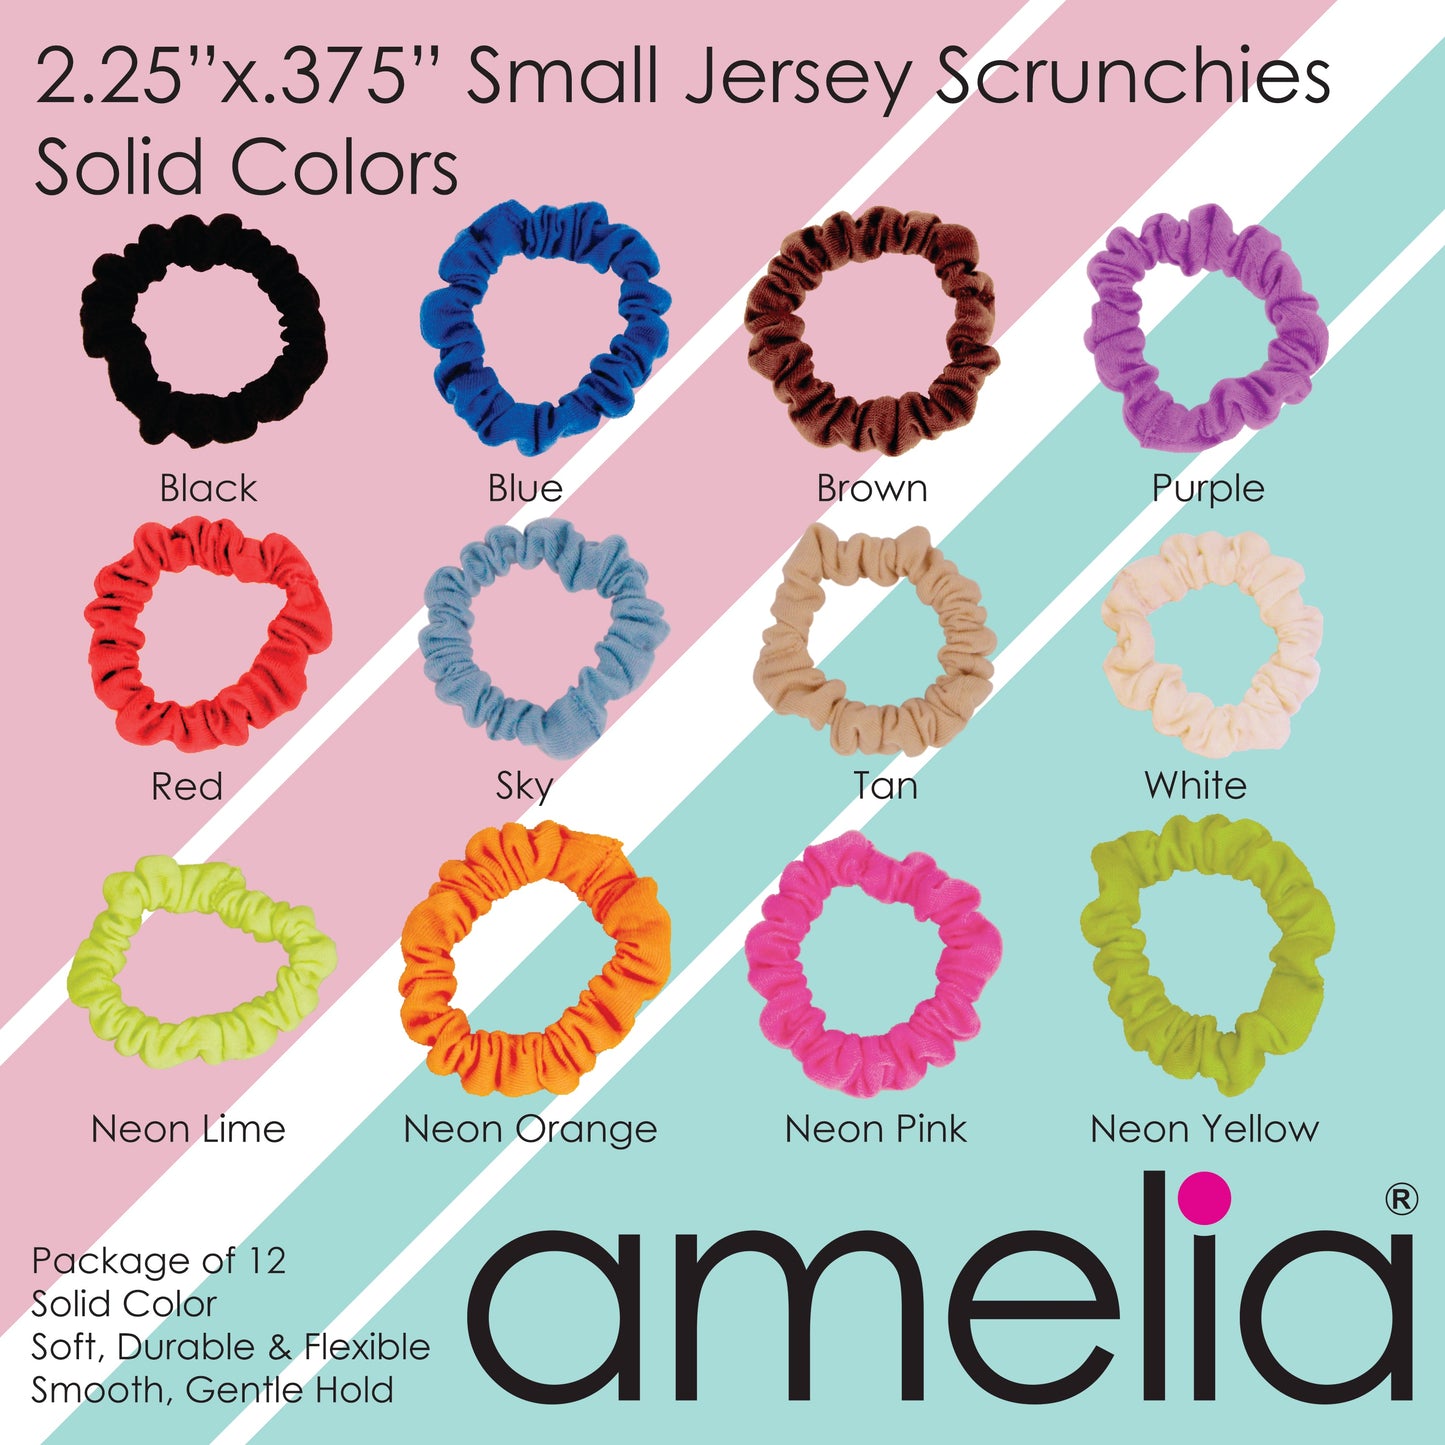 Amelia Beauty, Blue/Pink Dot Jersey Scrunchies, 2.25in Diameter, Gentle on Hair, Strong Hold, No Snag, No Dents or Creases. 12 Pack